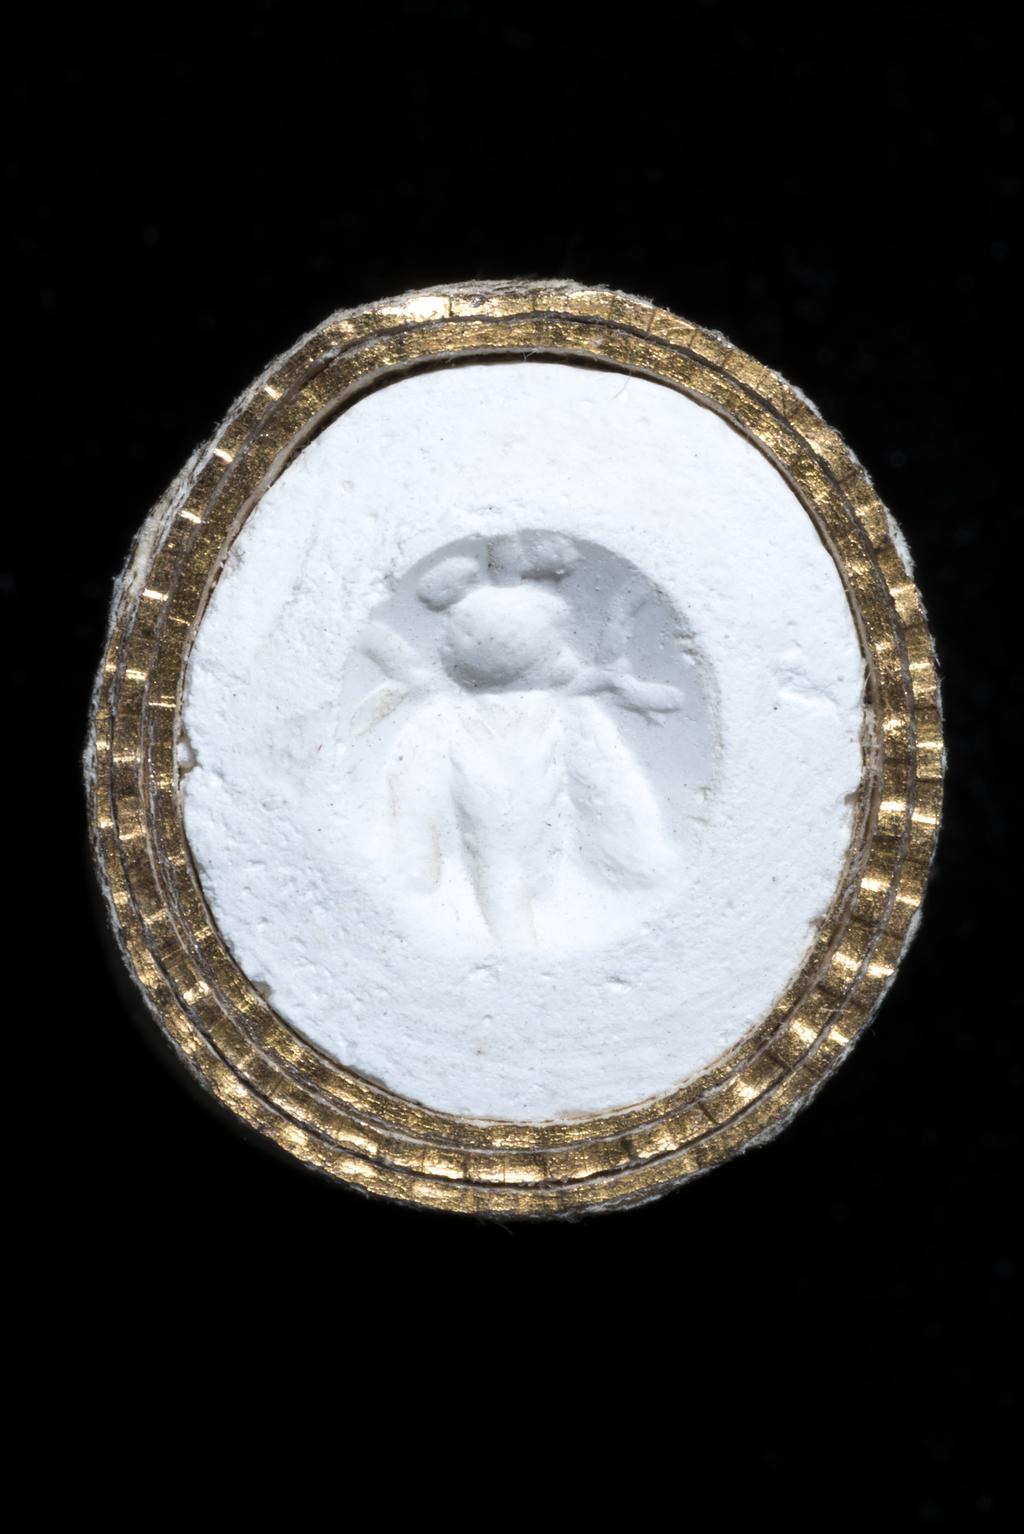 An image of Engraved gems/Ringstone. A cicada with large head and bullet-shaped body; wings by its side. Intaglio cutting, plasma, 6 mm x 5 mm, circa 0-circa 100 AD. Roman Imperial.